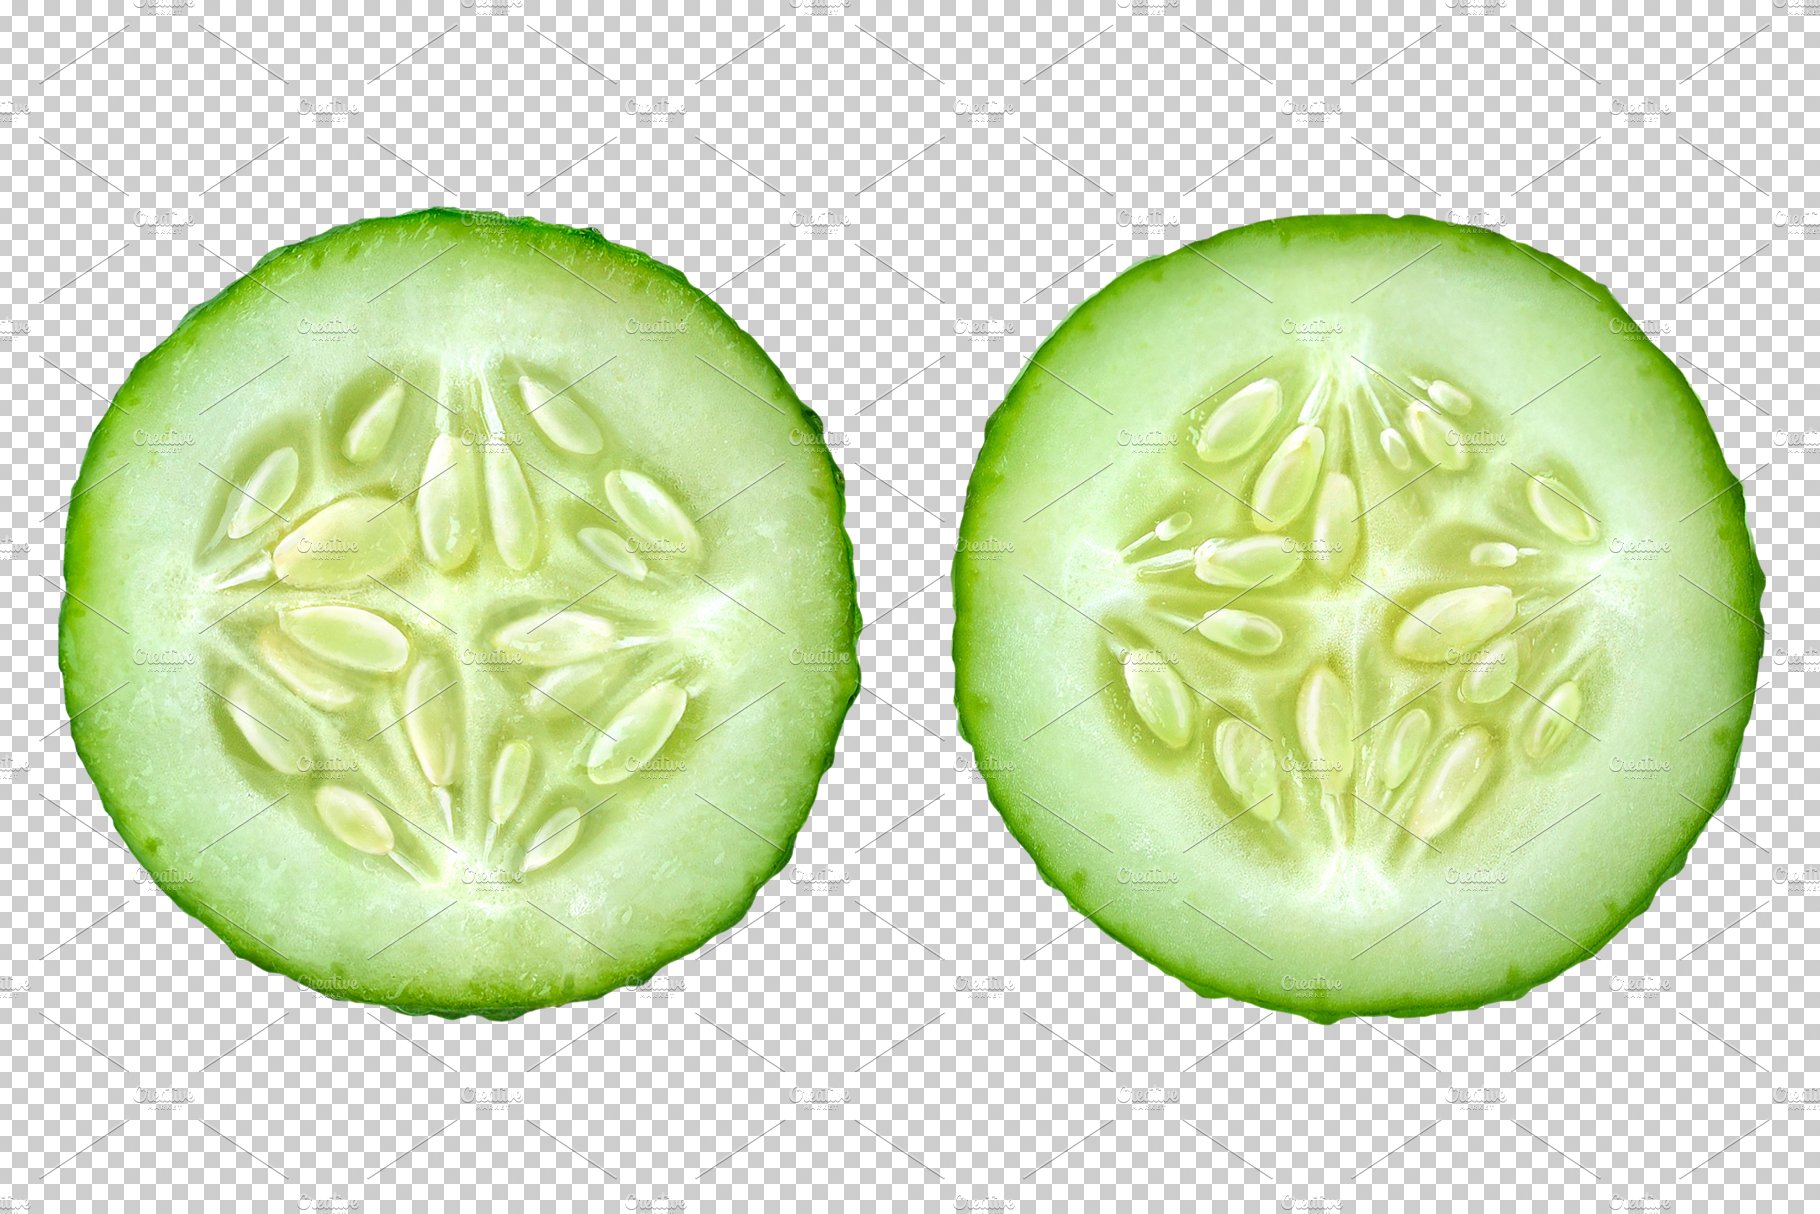 Two slices of cucumber preview image.